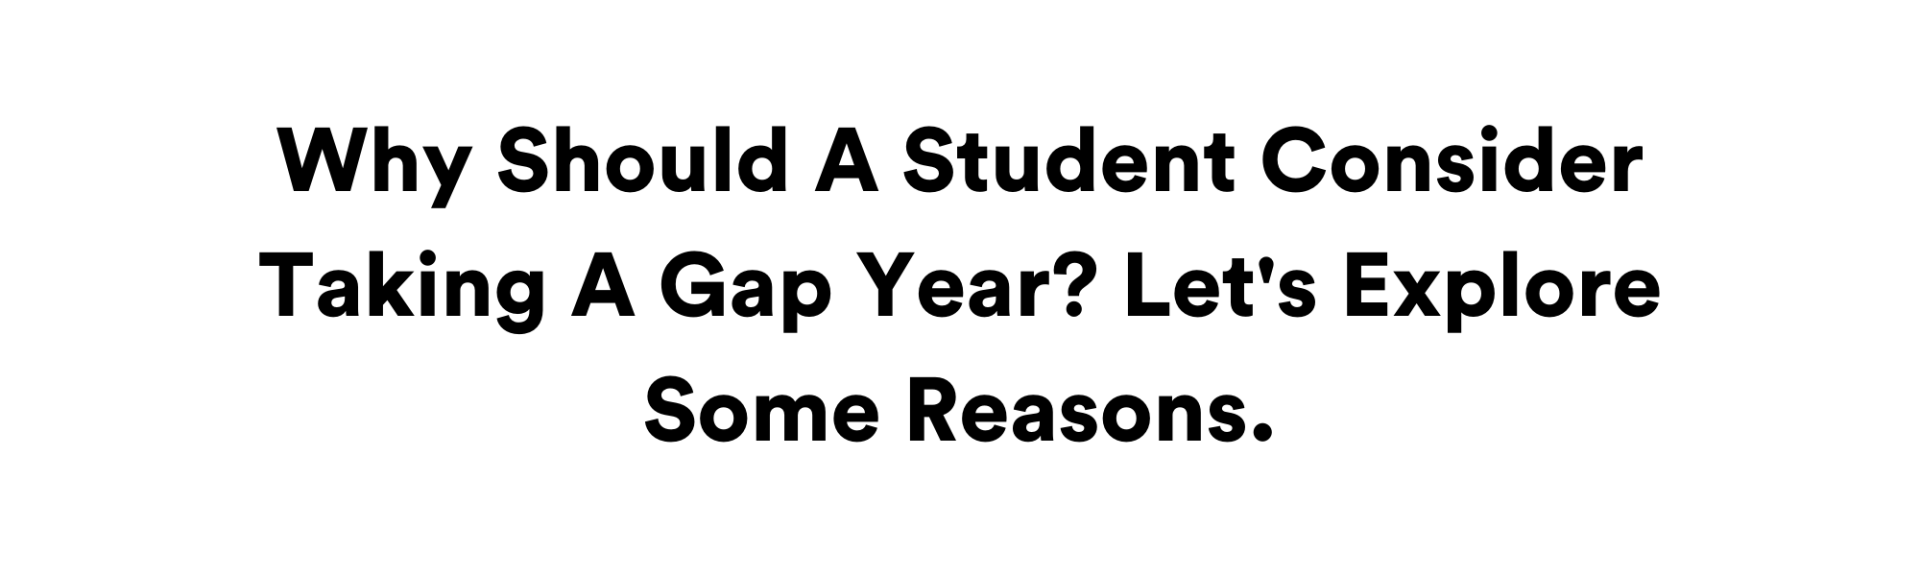 Why Should A Student Consider Taking A Gap Year? Let's Explore Some Reasons.